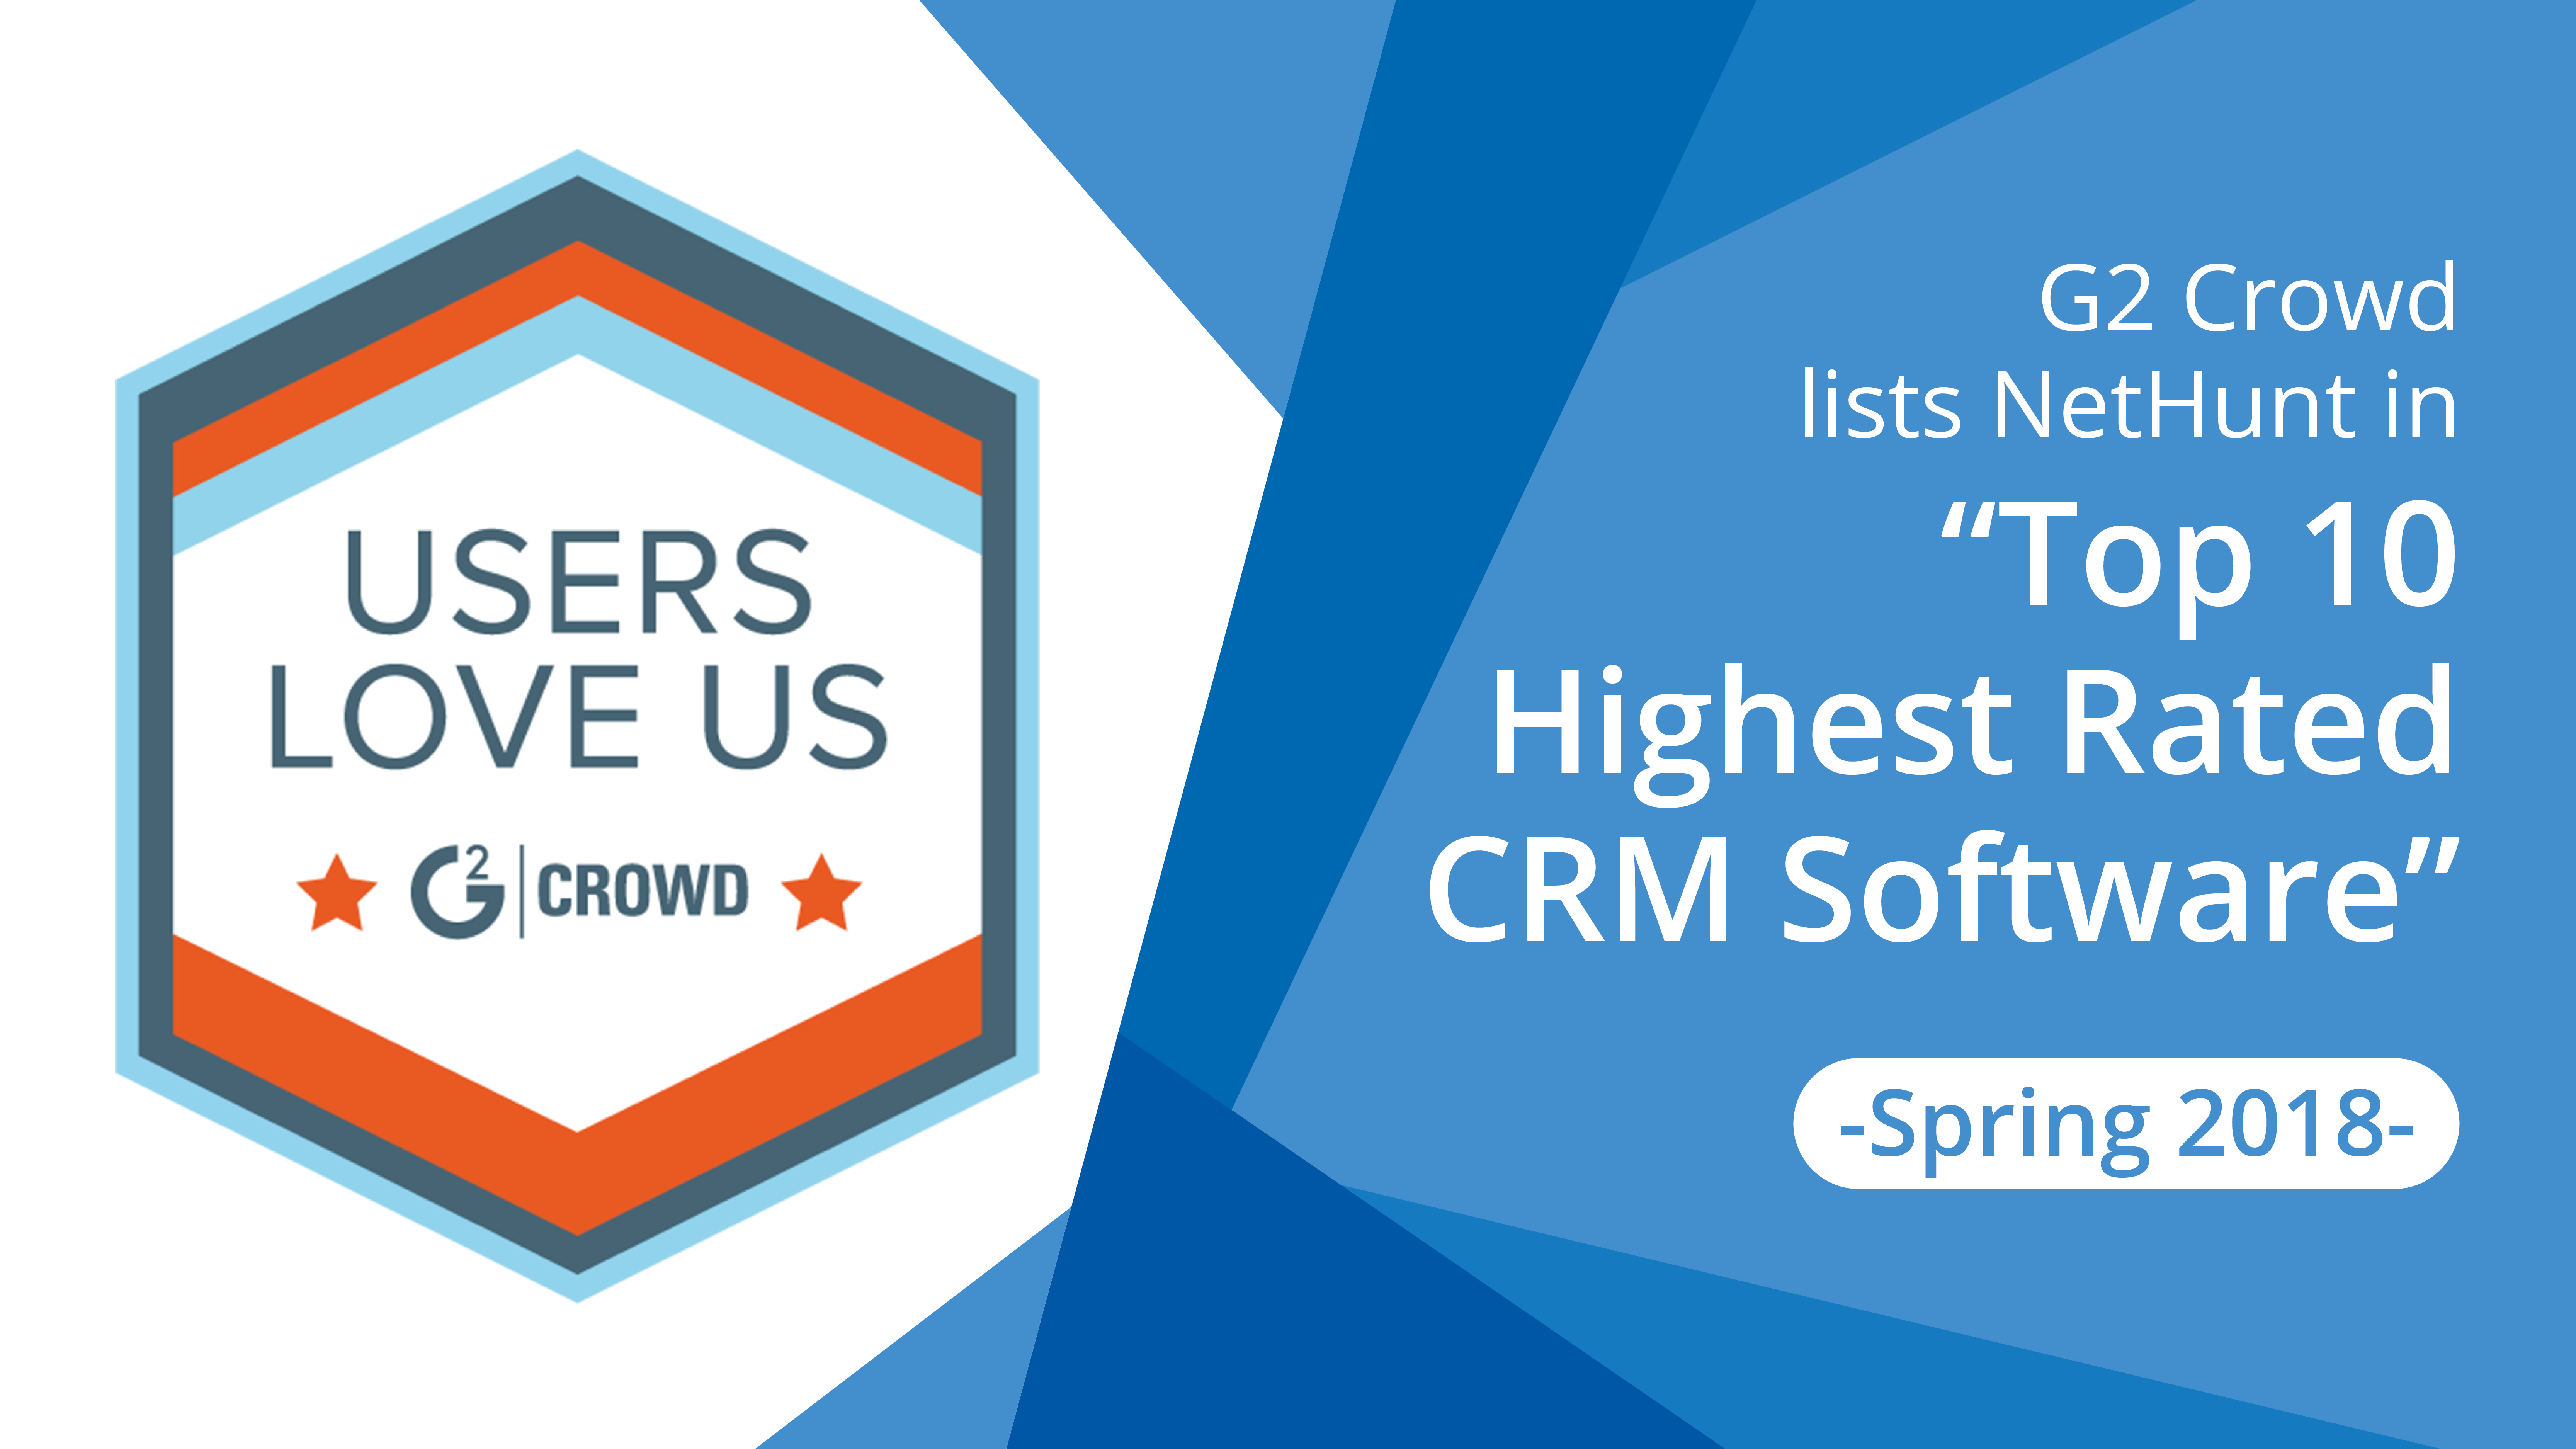 NetHunt Ranks as a Top CRM in G2 Crowd Spring 2018 Grid Report Newswire